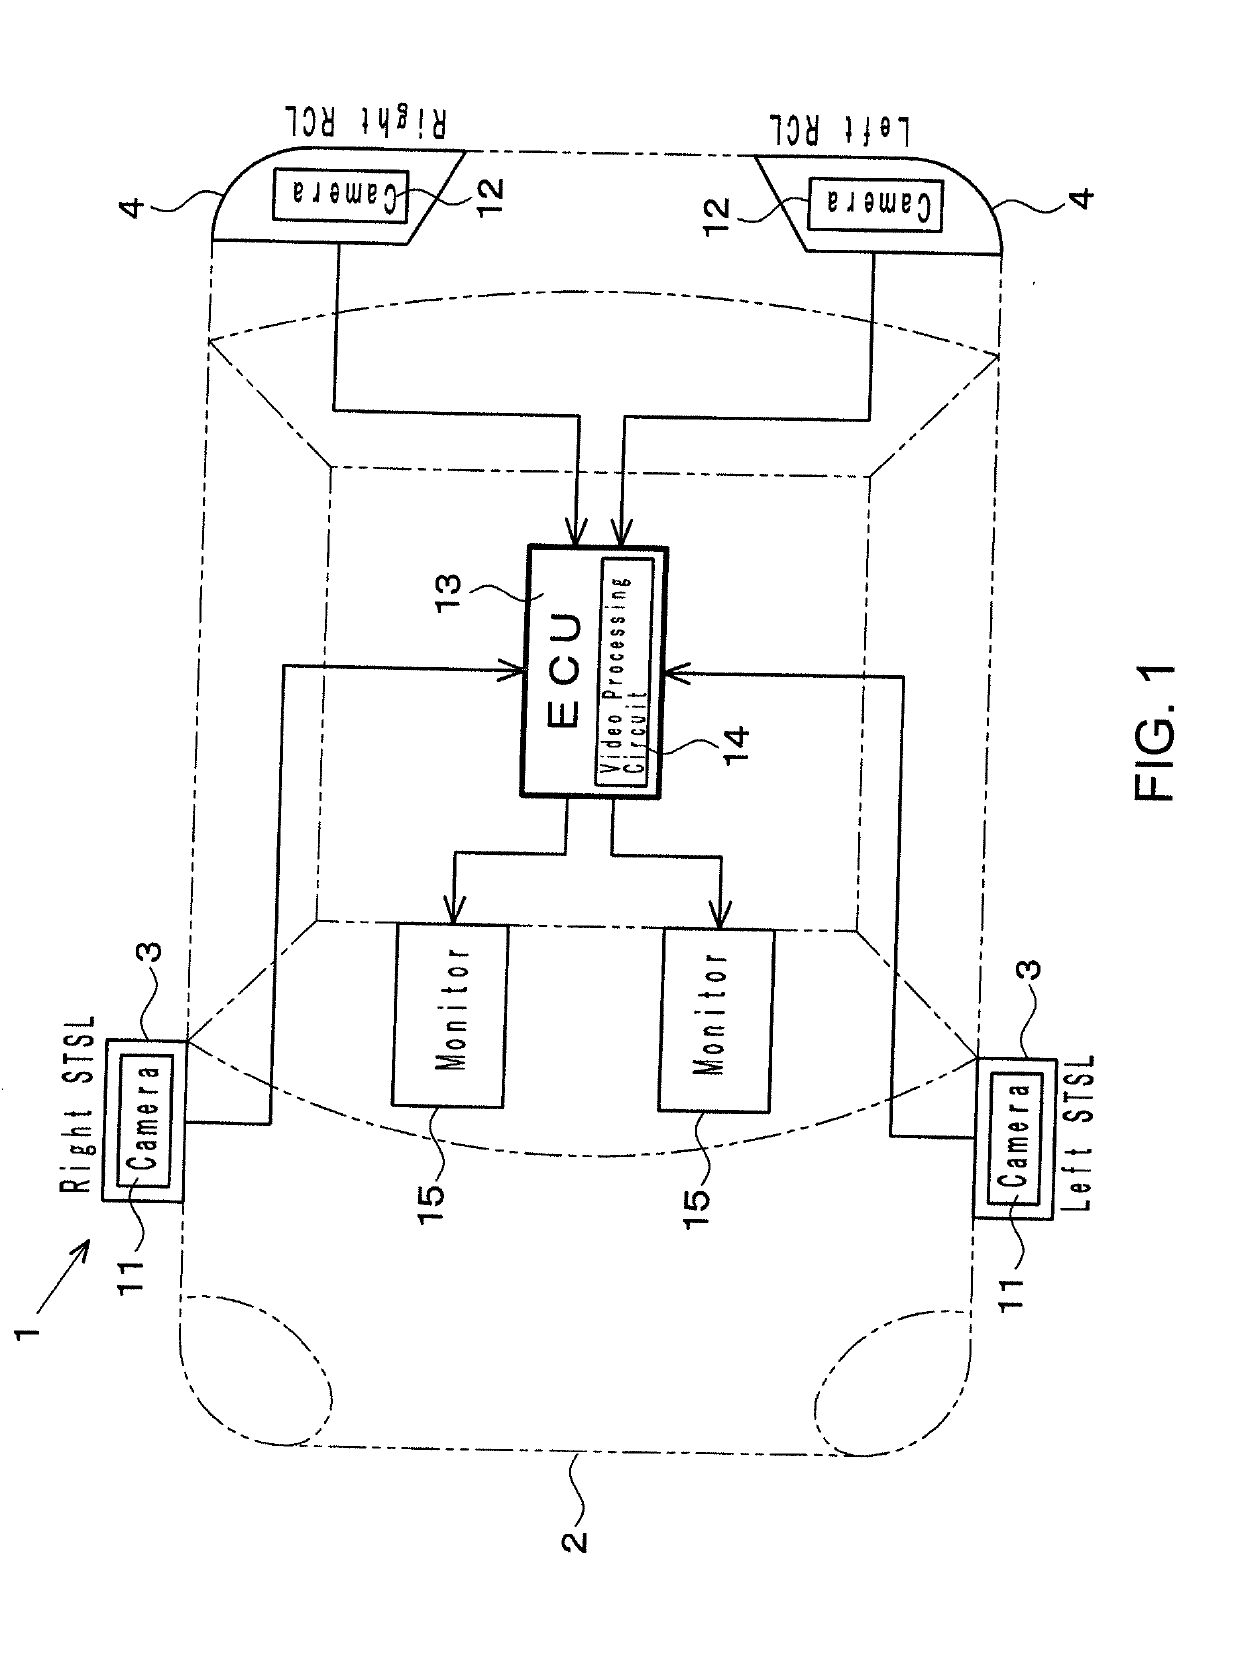 Vehicle monitoring system using a plurality of cameras